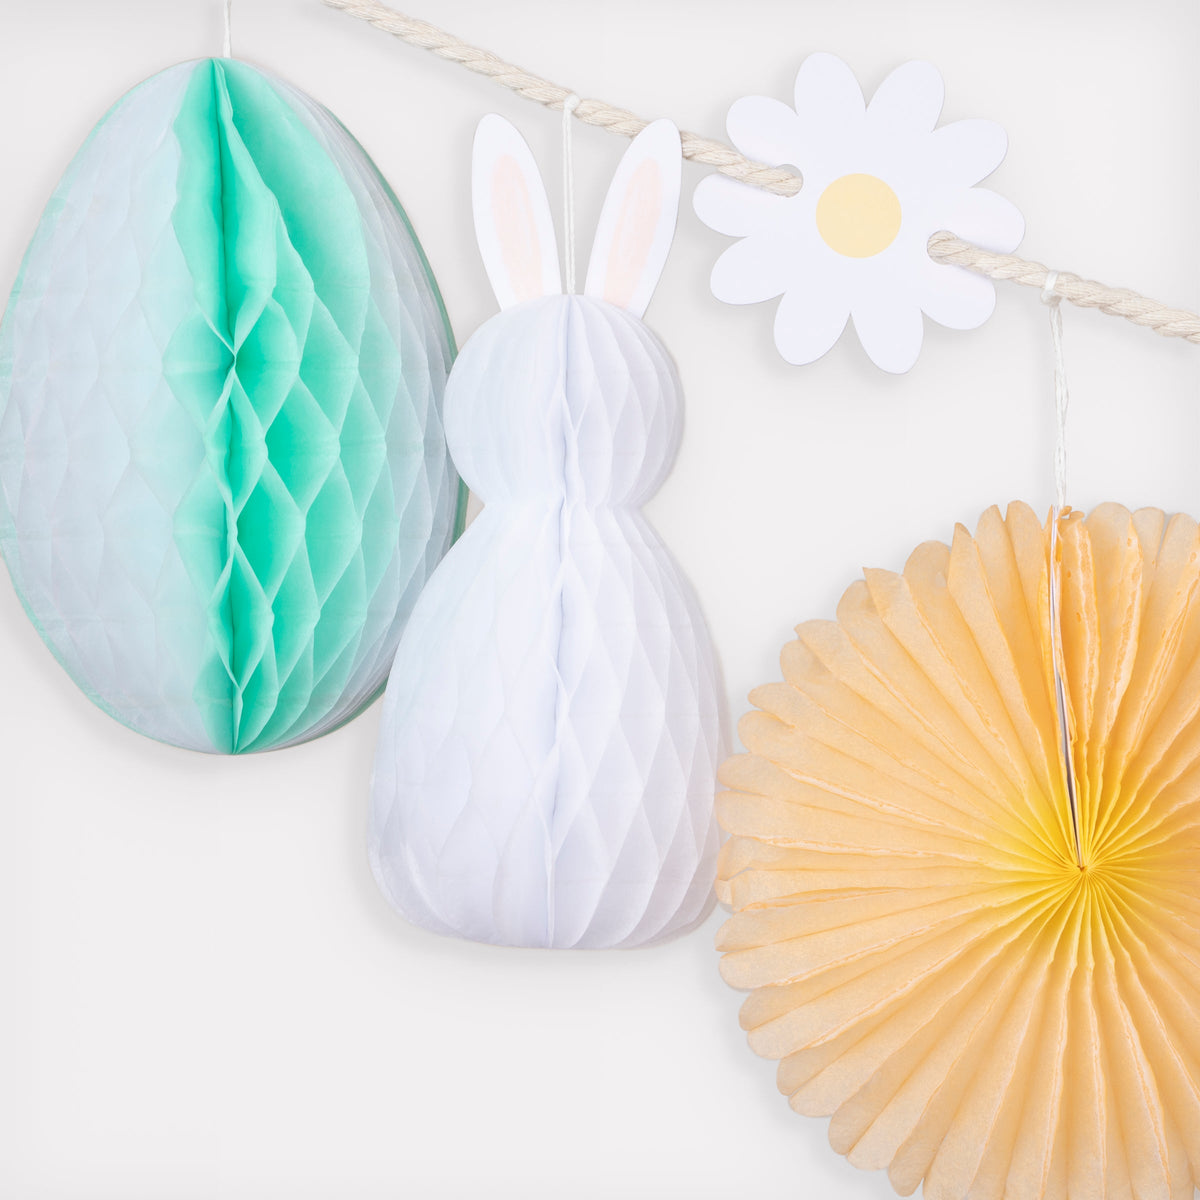 Easter Bunny with Egg Hanging Honeycomb Decorations – 6 Pc